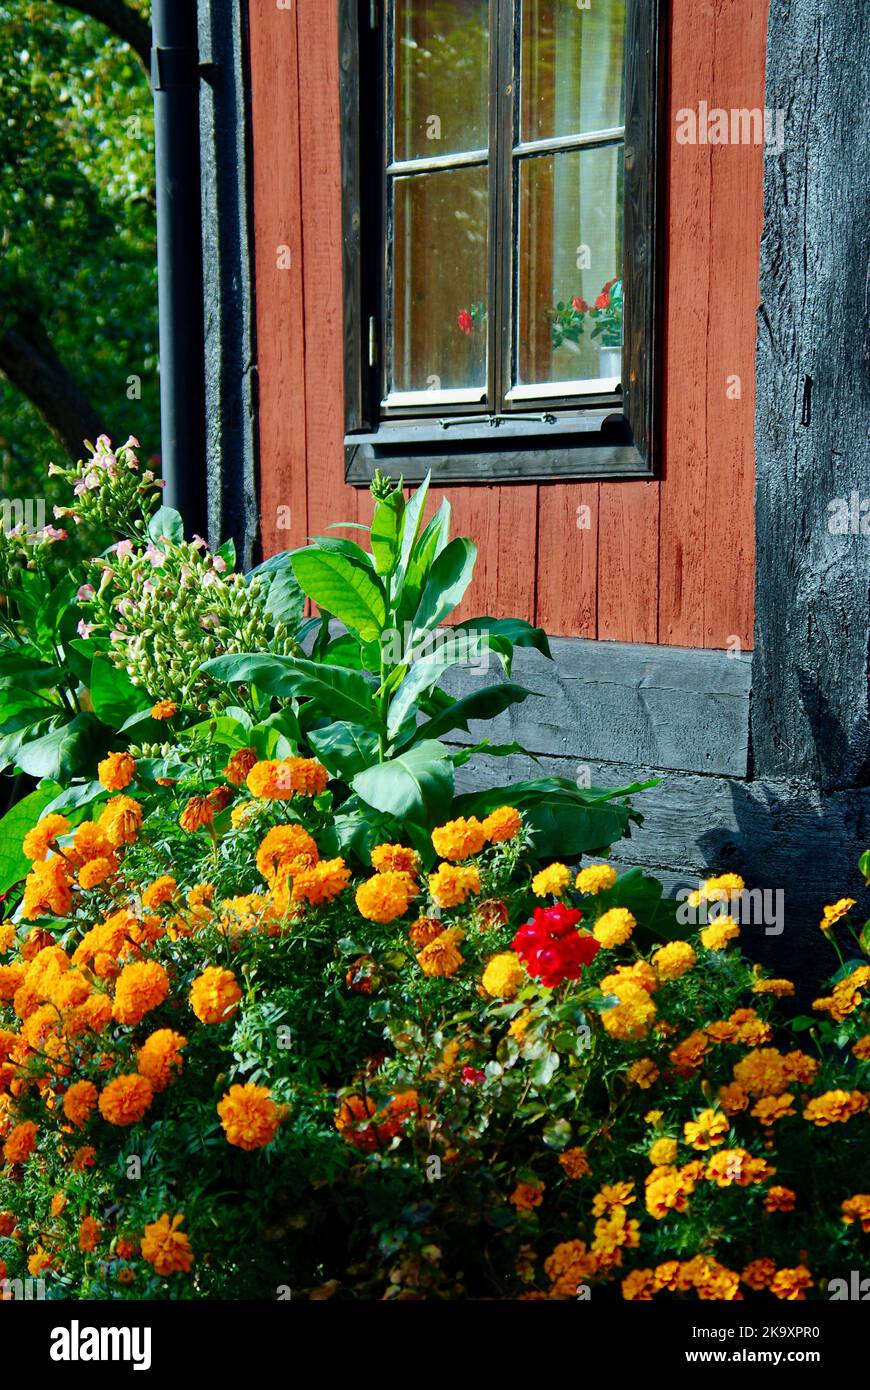 Flowerbed with orange colored marigold flowers in front of a red painted wooden house in autumn. Stock Photo